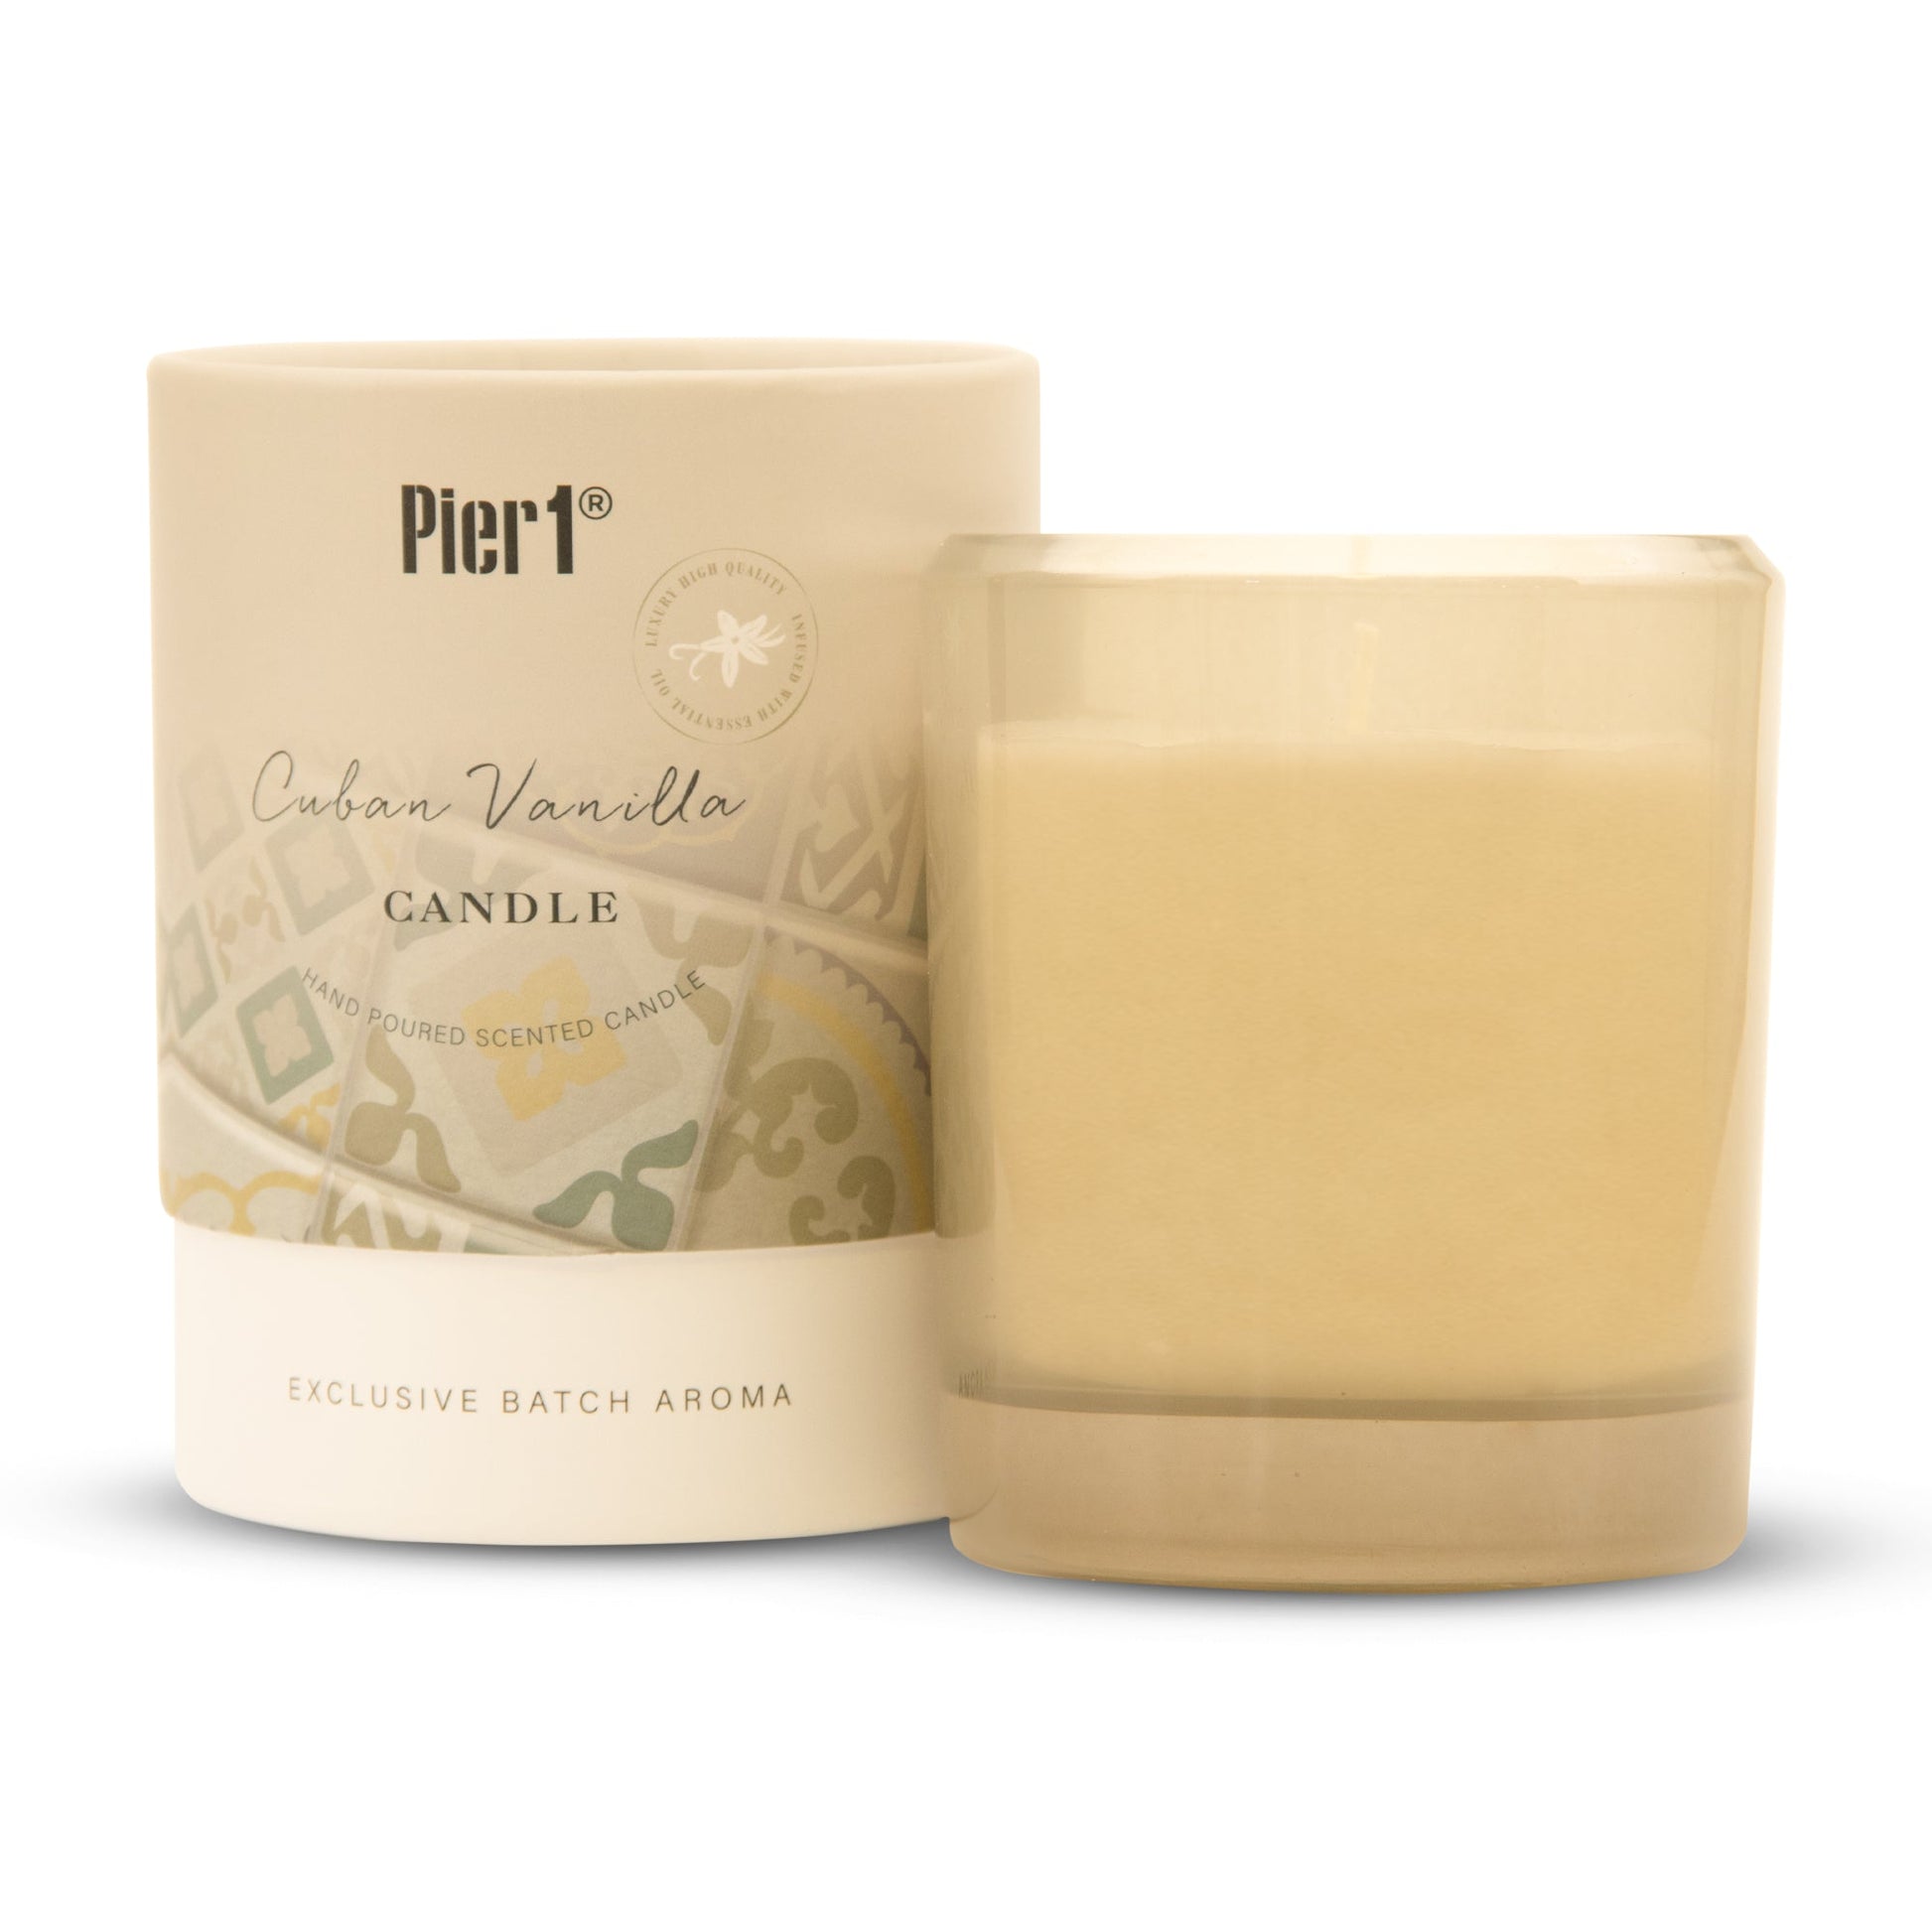 Pier 1 Cuban Vanilla 8oz Boxed Soy Candle - The Home Resolution